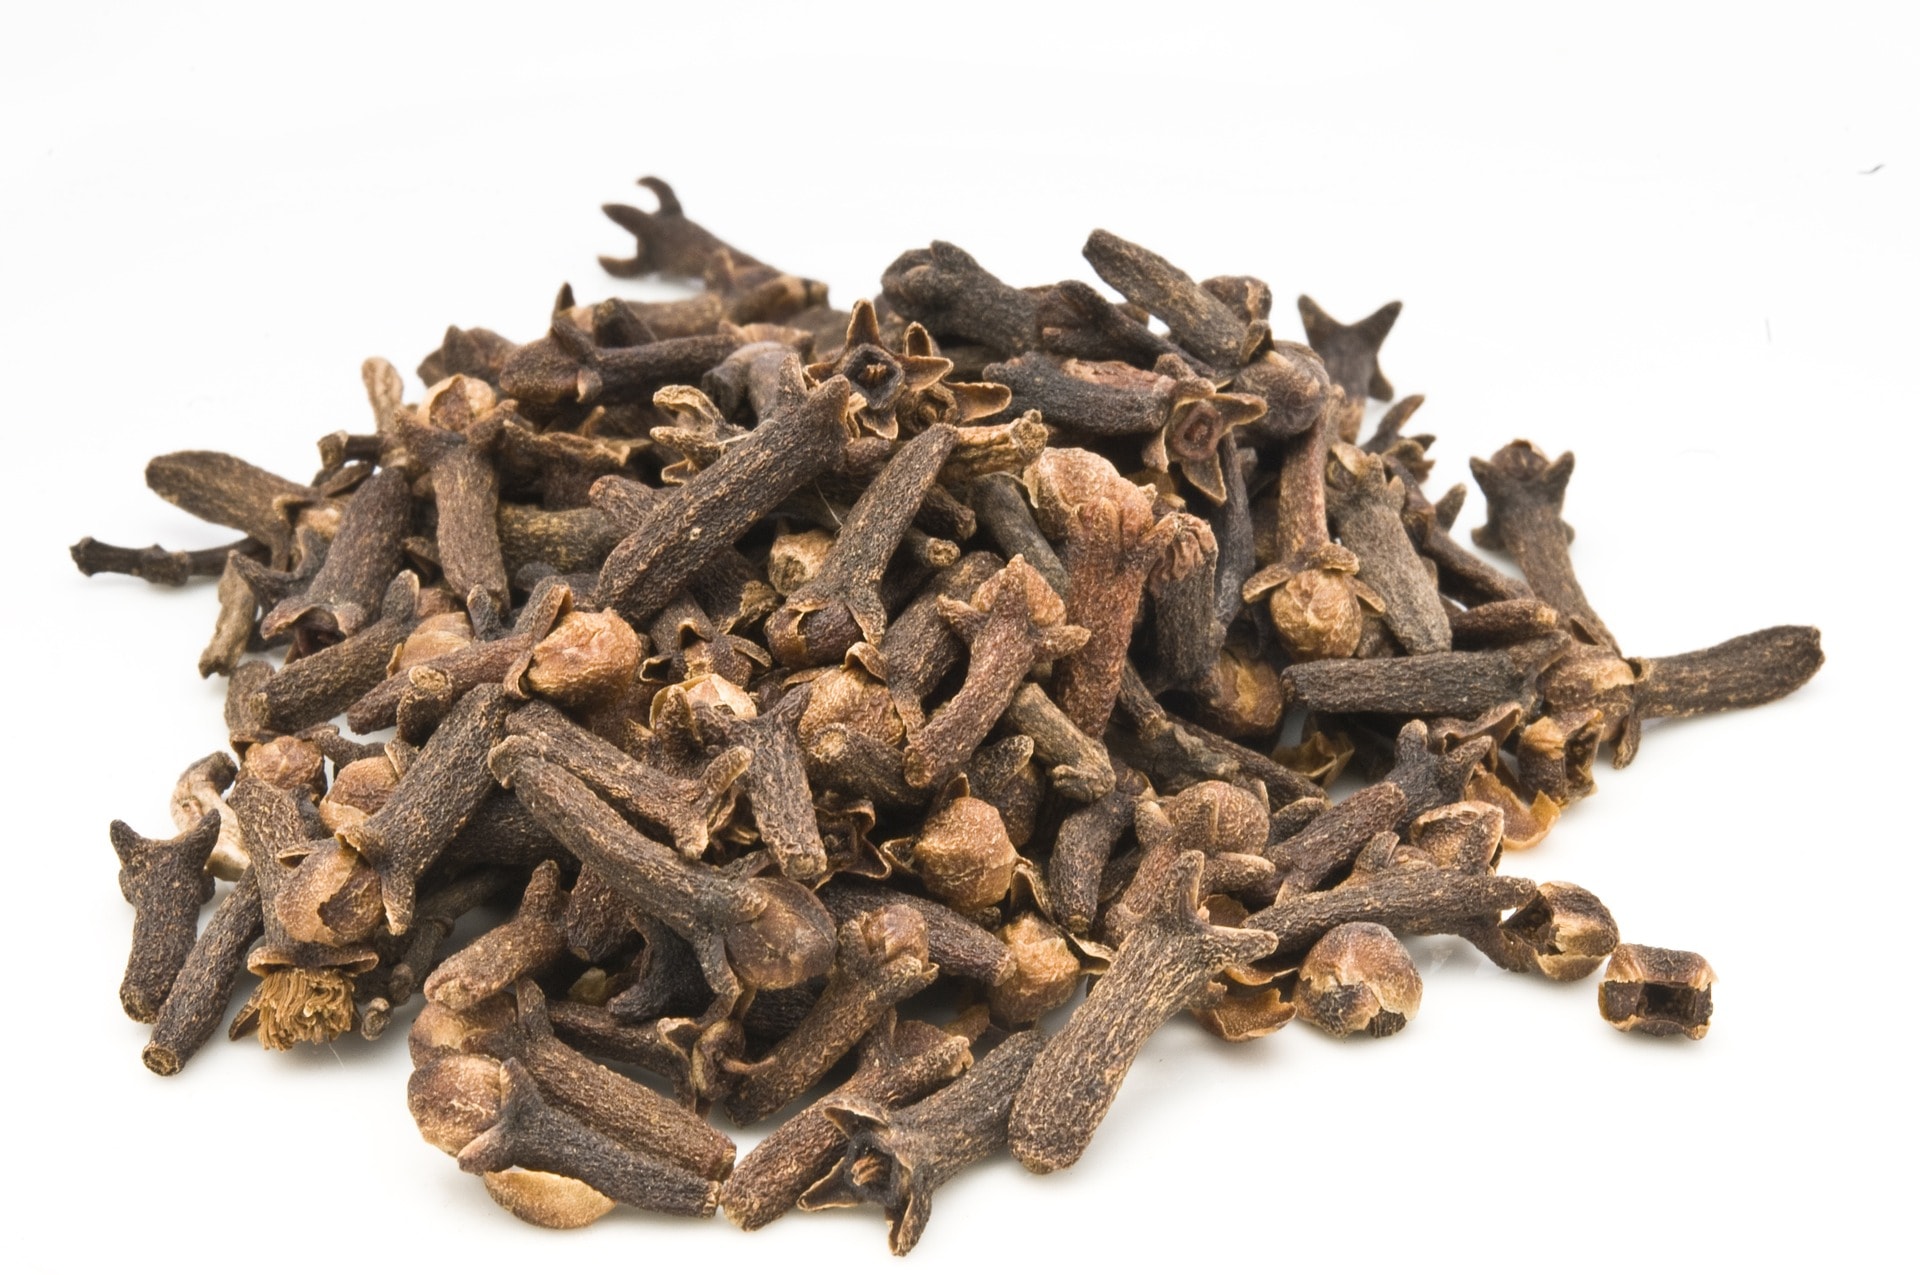 cloves in a white background